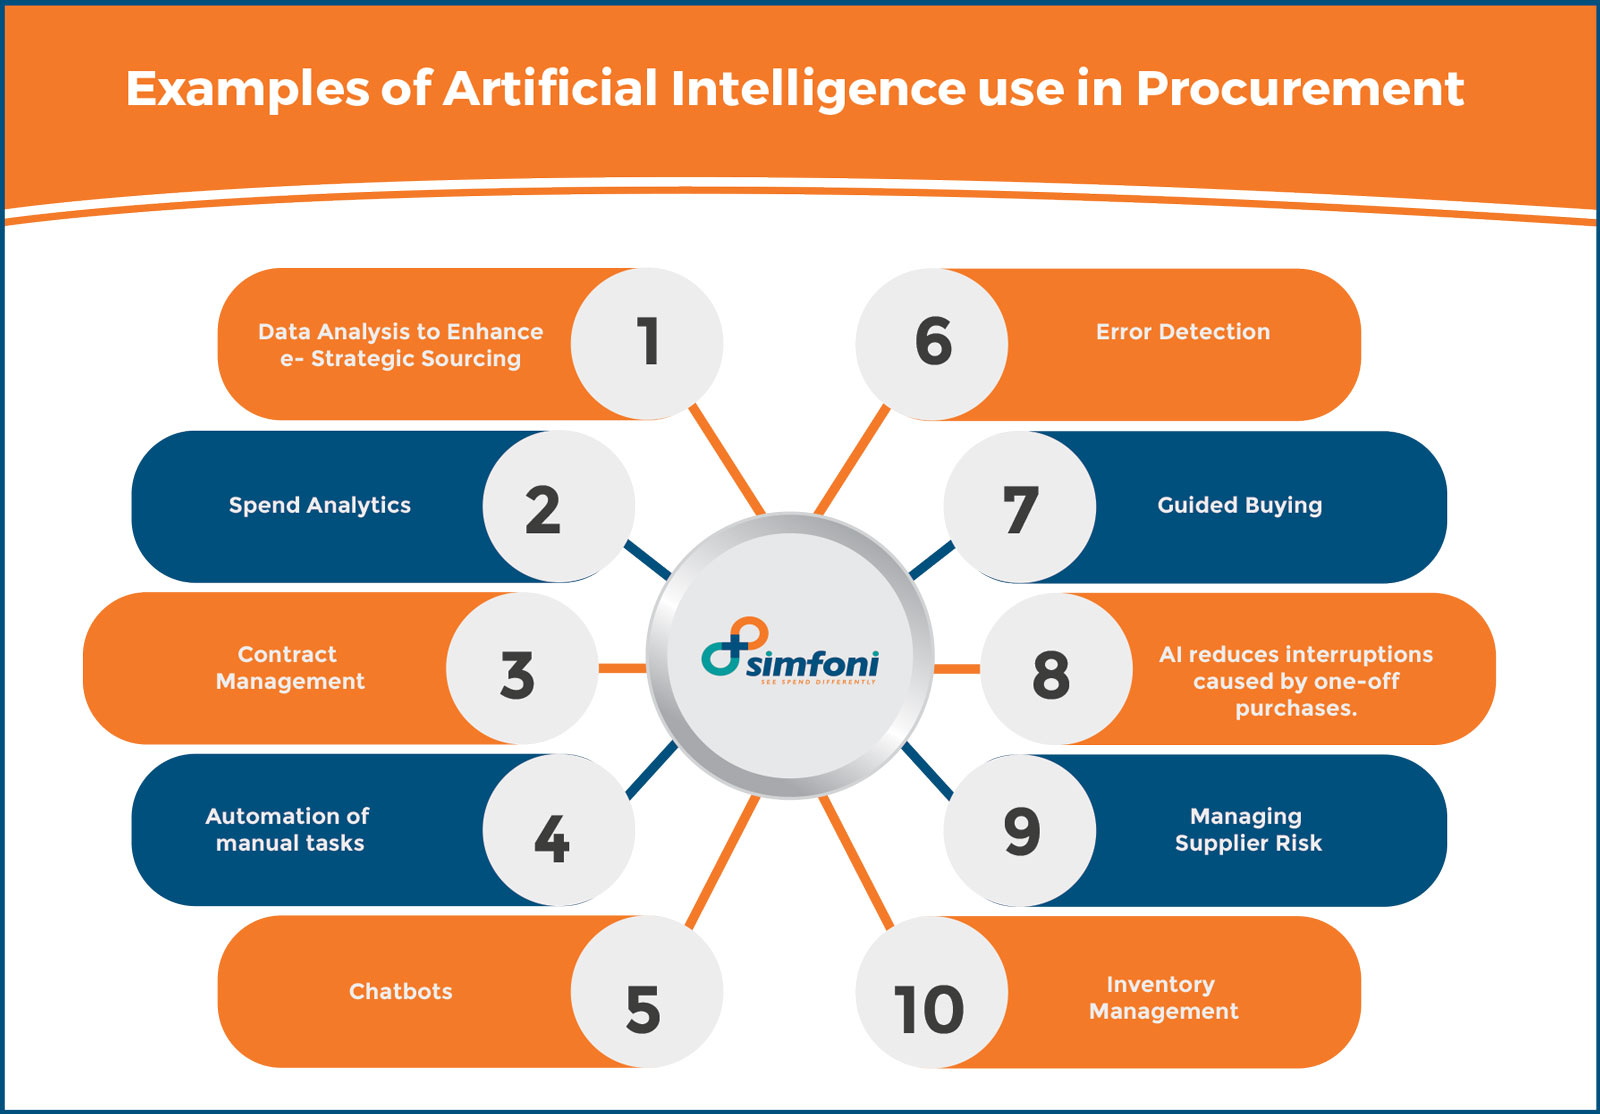 Examples of use of Artificial Intelligence in Procurement